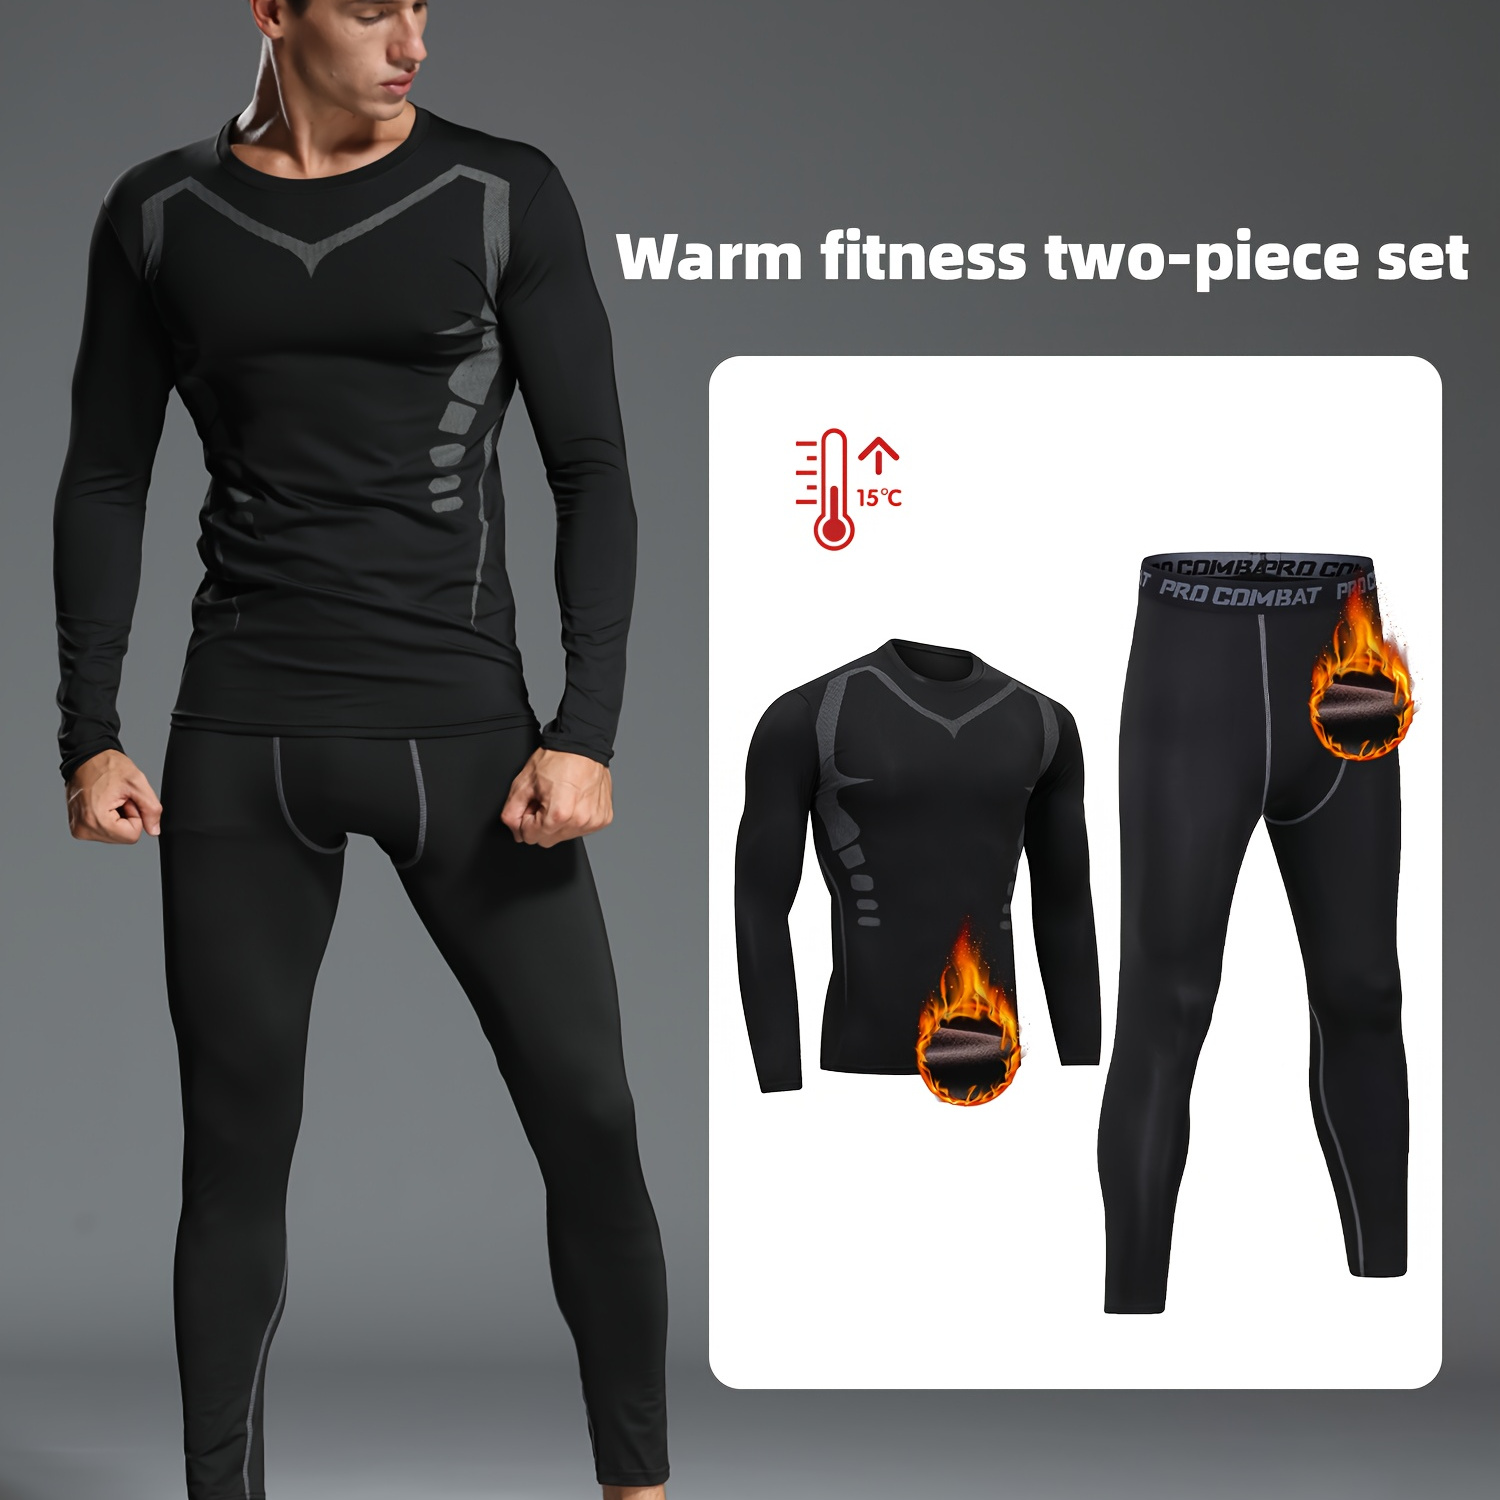 

Men's Thermal Sportswear 2-piece Set - Warm Fleece Lined Compression Outfit For Running, Gym, And Outdoor Activities